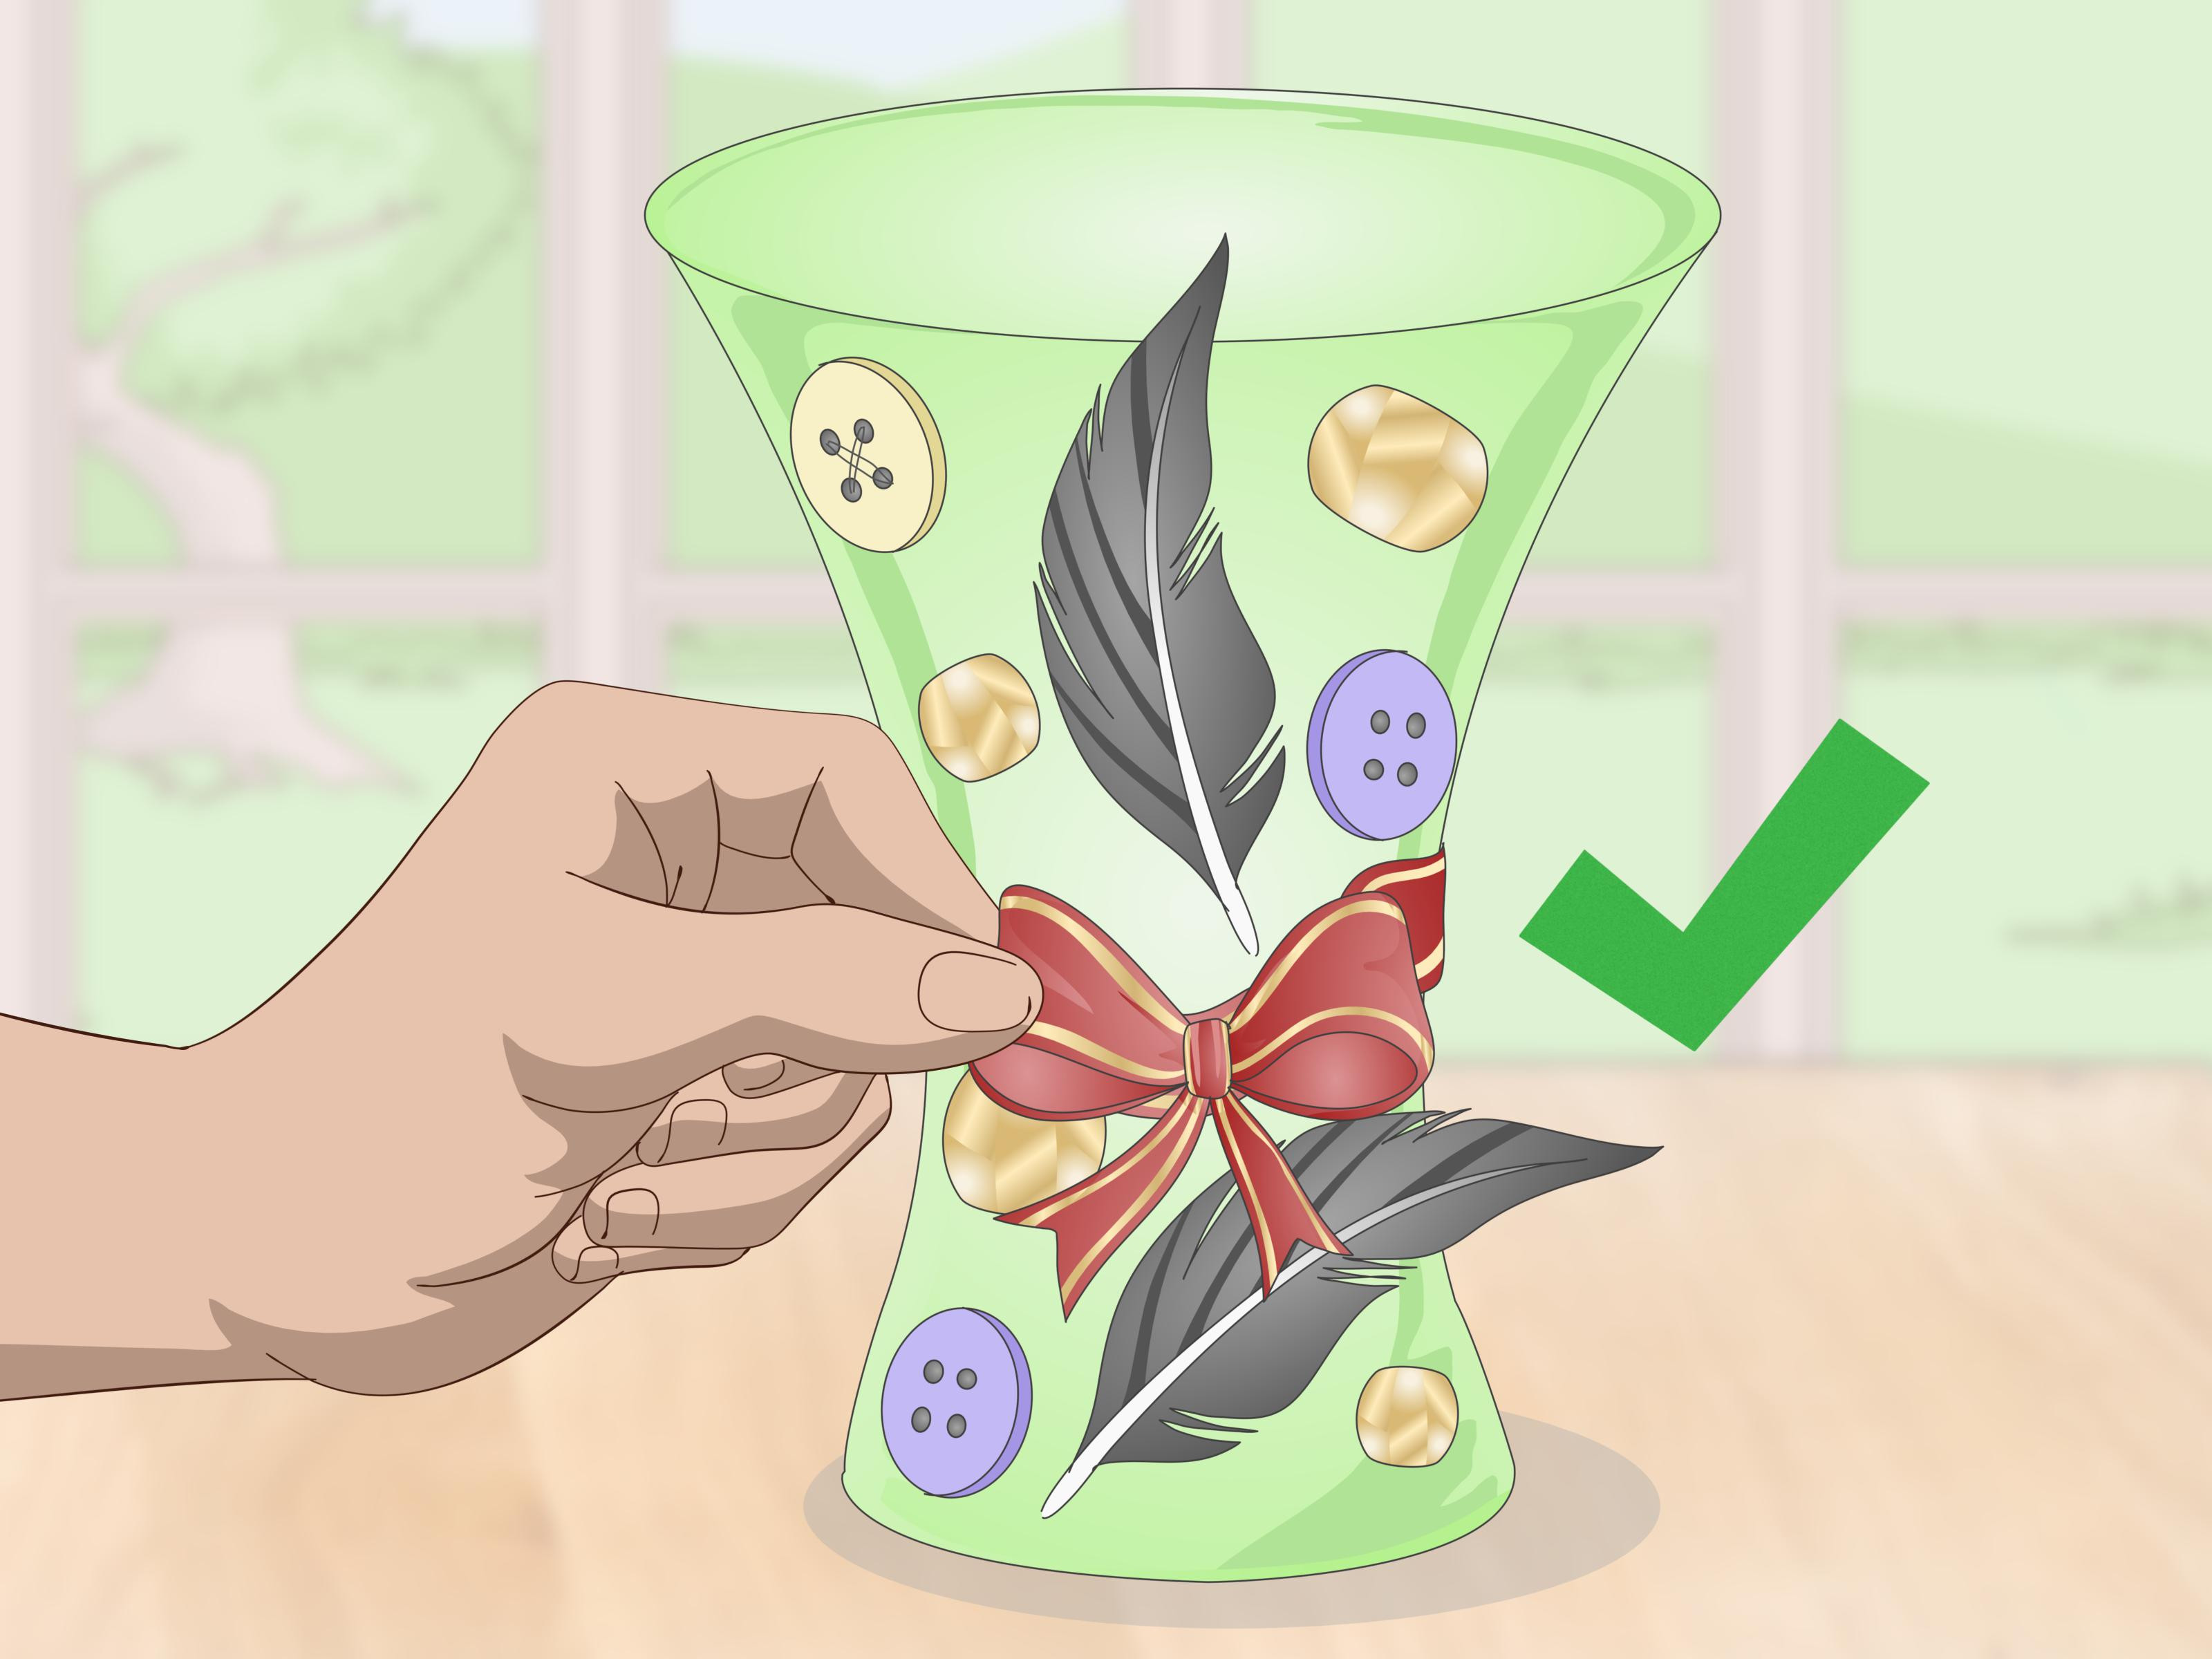 18 Cute Small Flower Vase Online 2024 free download small flower vase online of 3 ways to decorate a flower vase with a ribbon wikihow intended for decorate a flower vase with a ribbon step 14